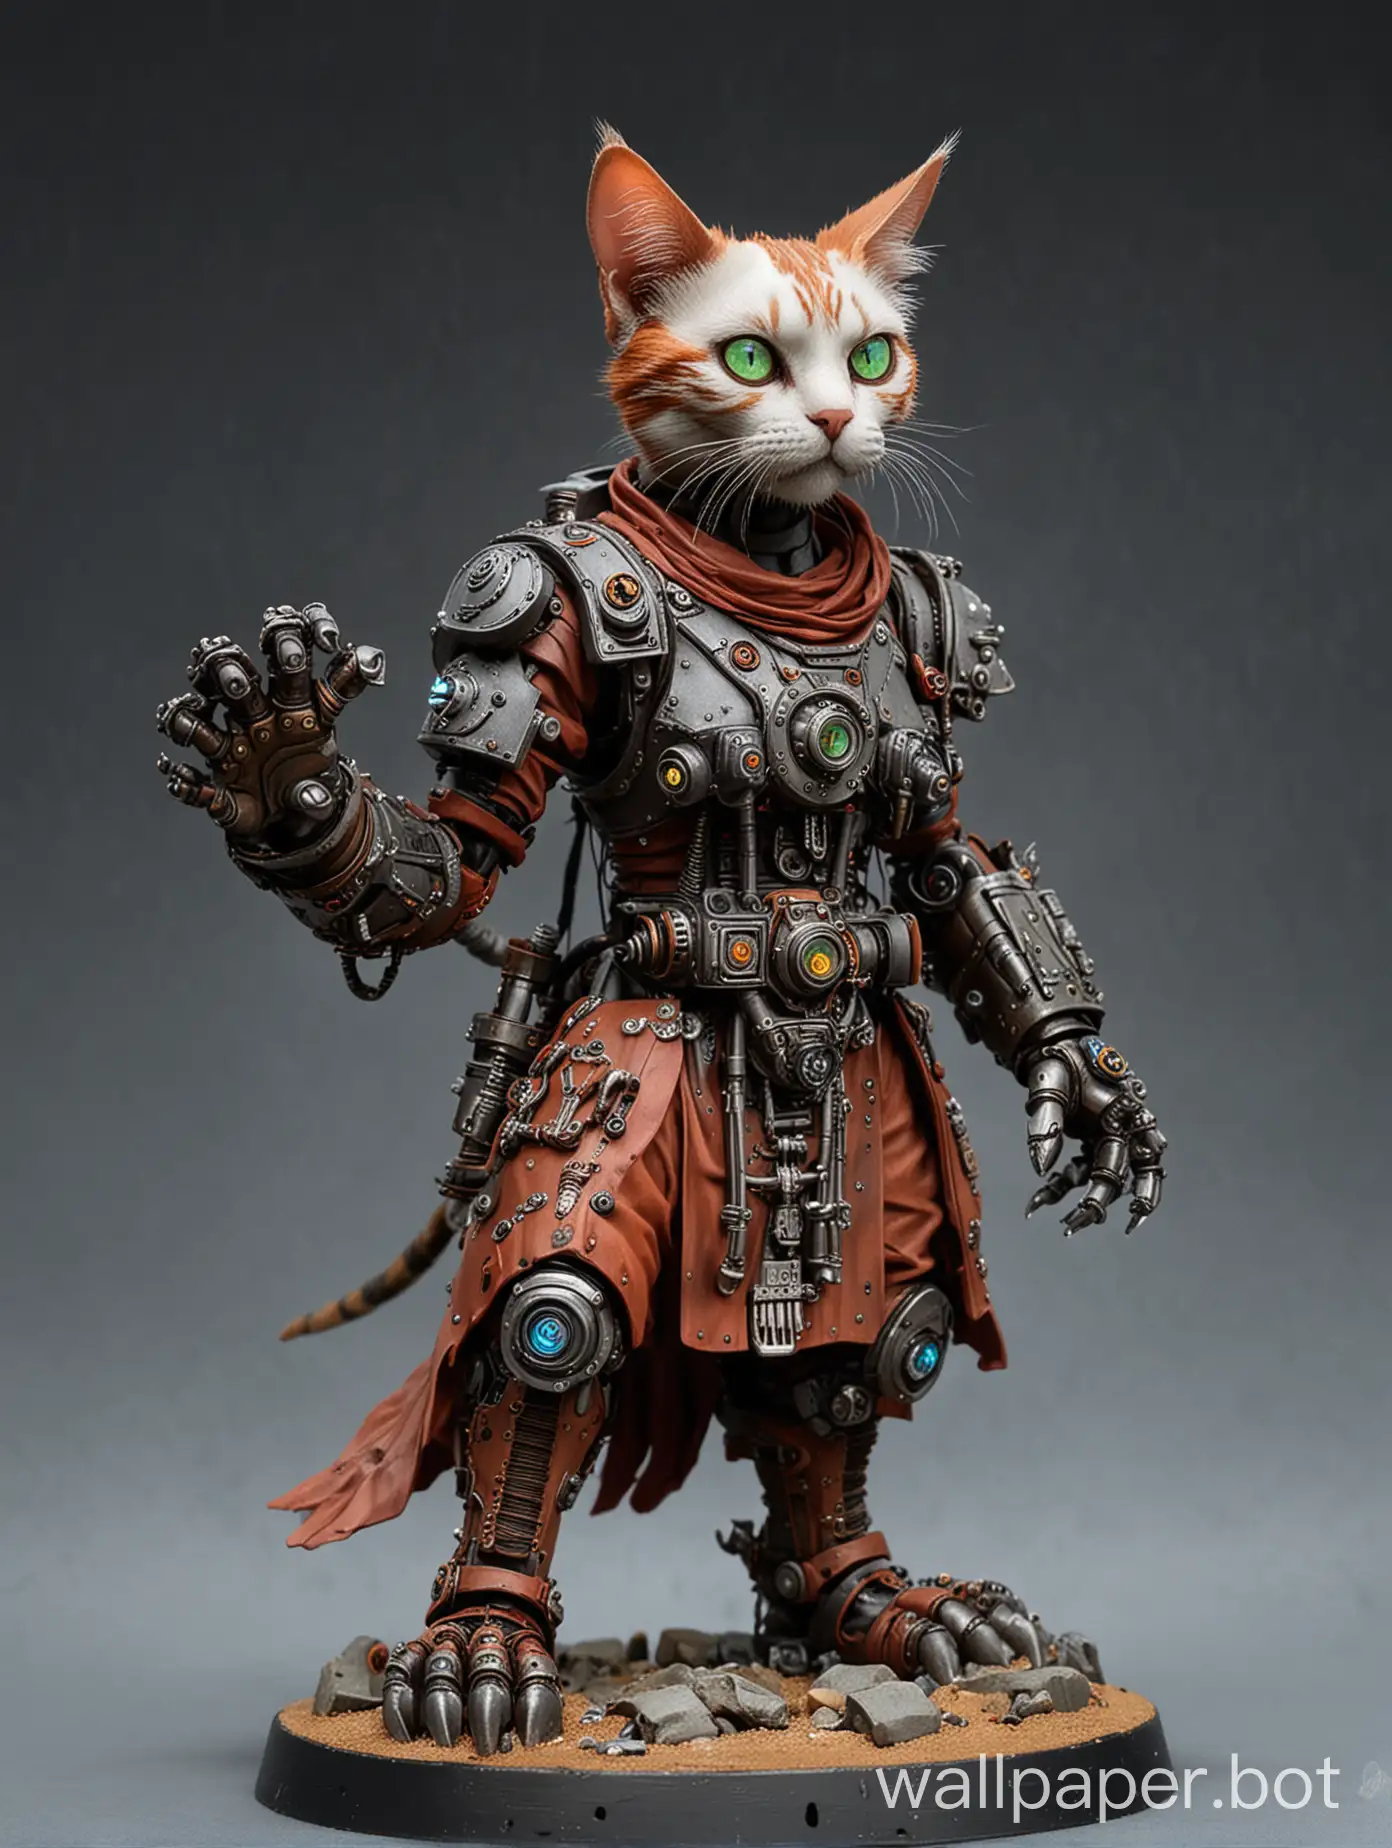 Cat-Adeptus-Mechanicus-Tech-Priest-with-Glowing-Cybernetic-Eyes